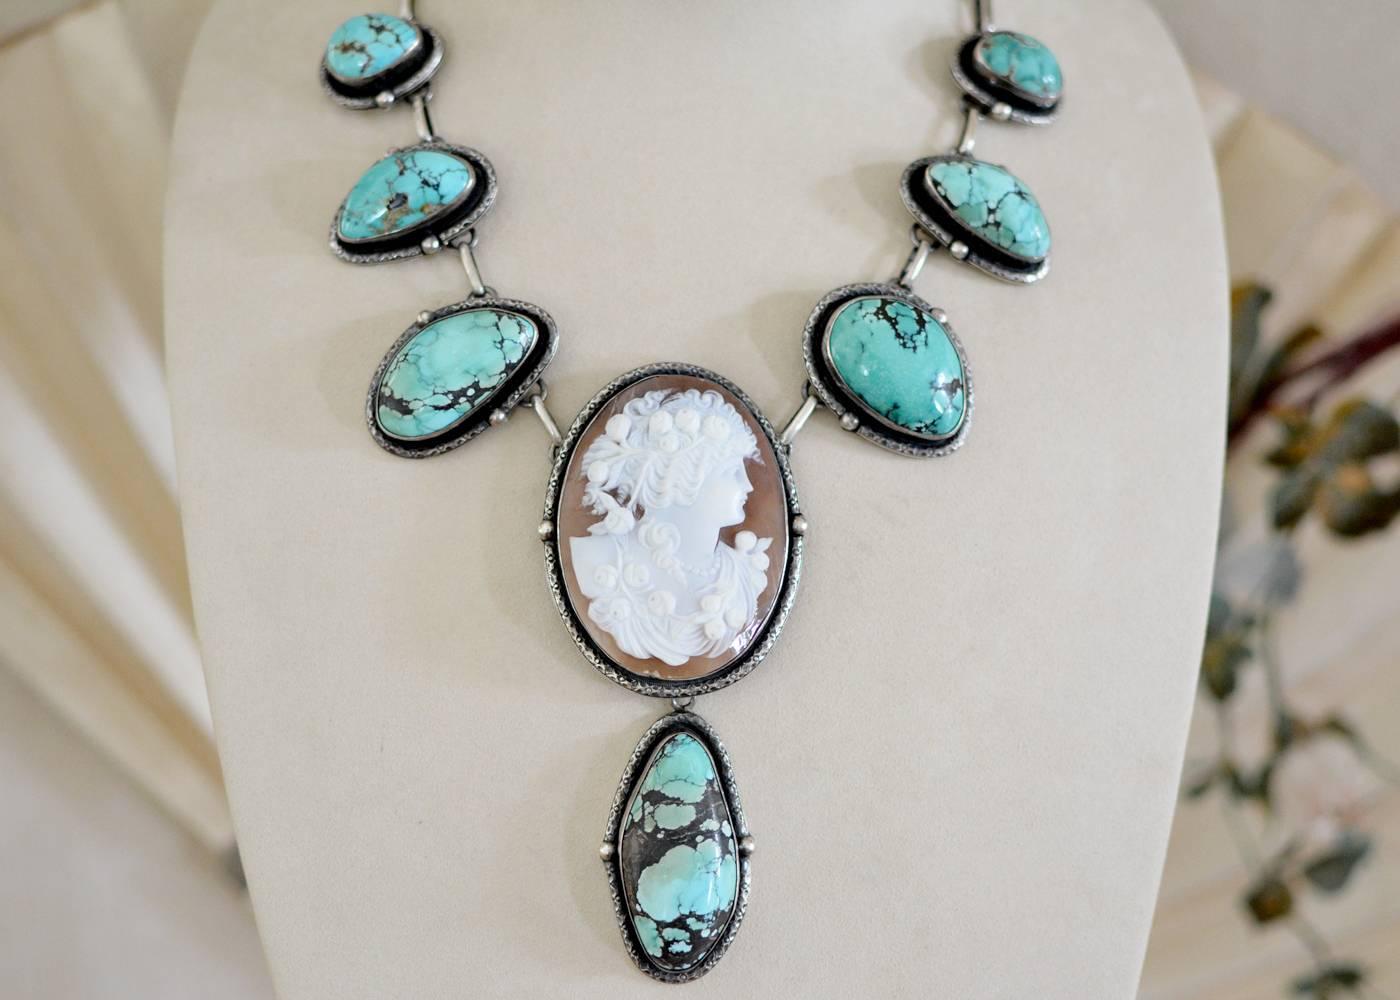 This one of a kind Bohemian necklace features six large naturally shaped turquoise cabochon festoons and a beautiful very fine, highly detailed carved Georgian period Goddess Cameo having a large turquoise drop at the center. Blending periods and